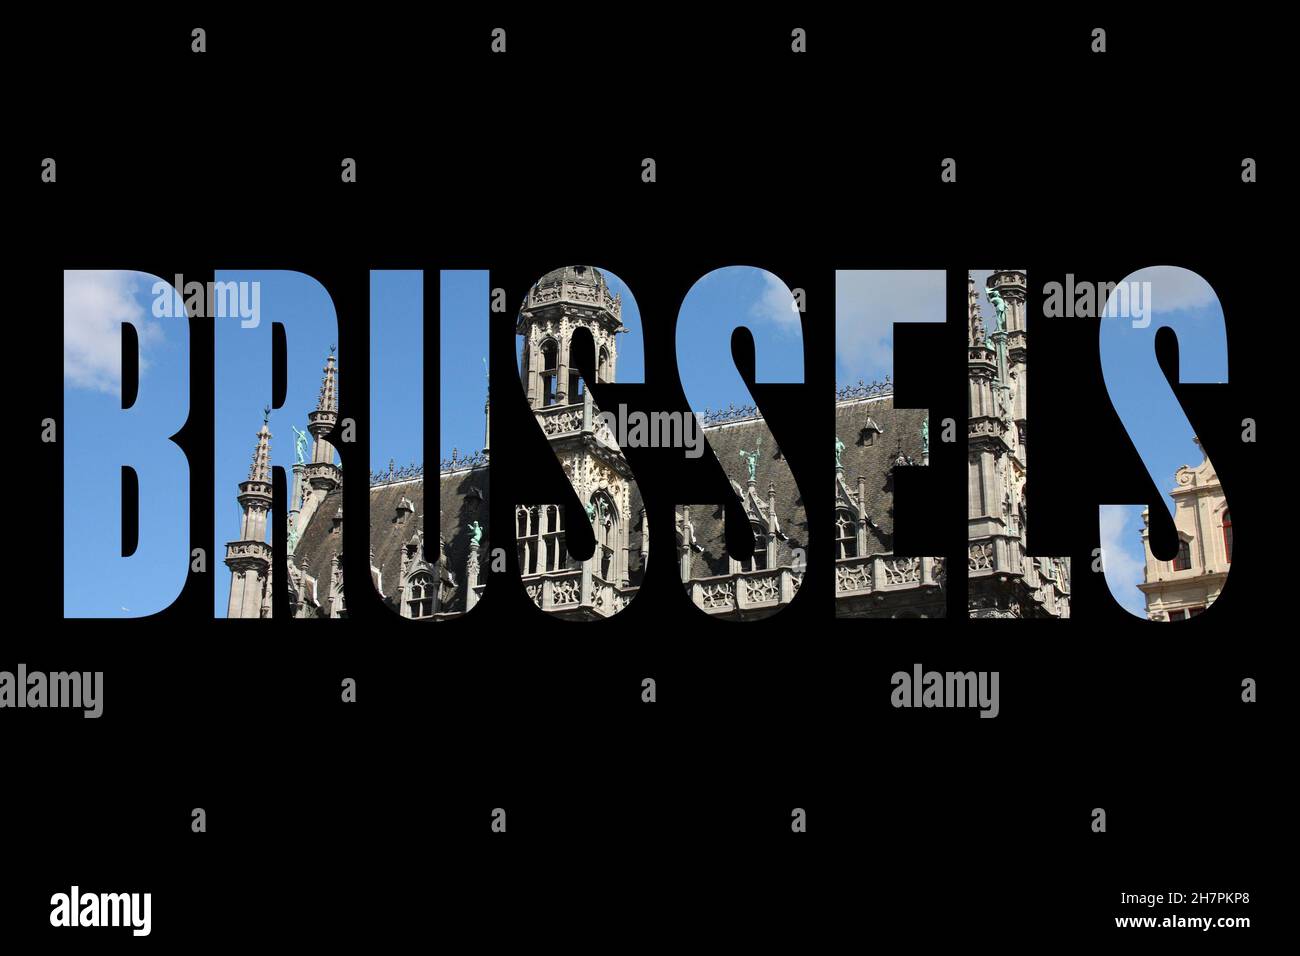 Brussels, Belgium - city name text with photo in background. Stock Photo